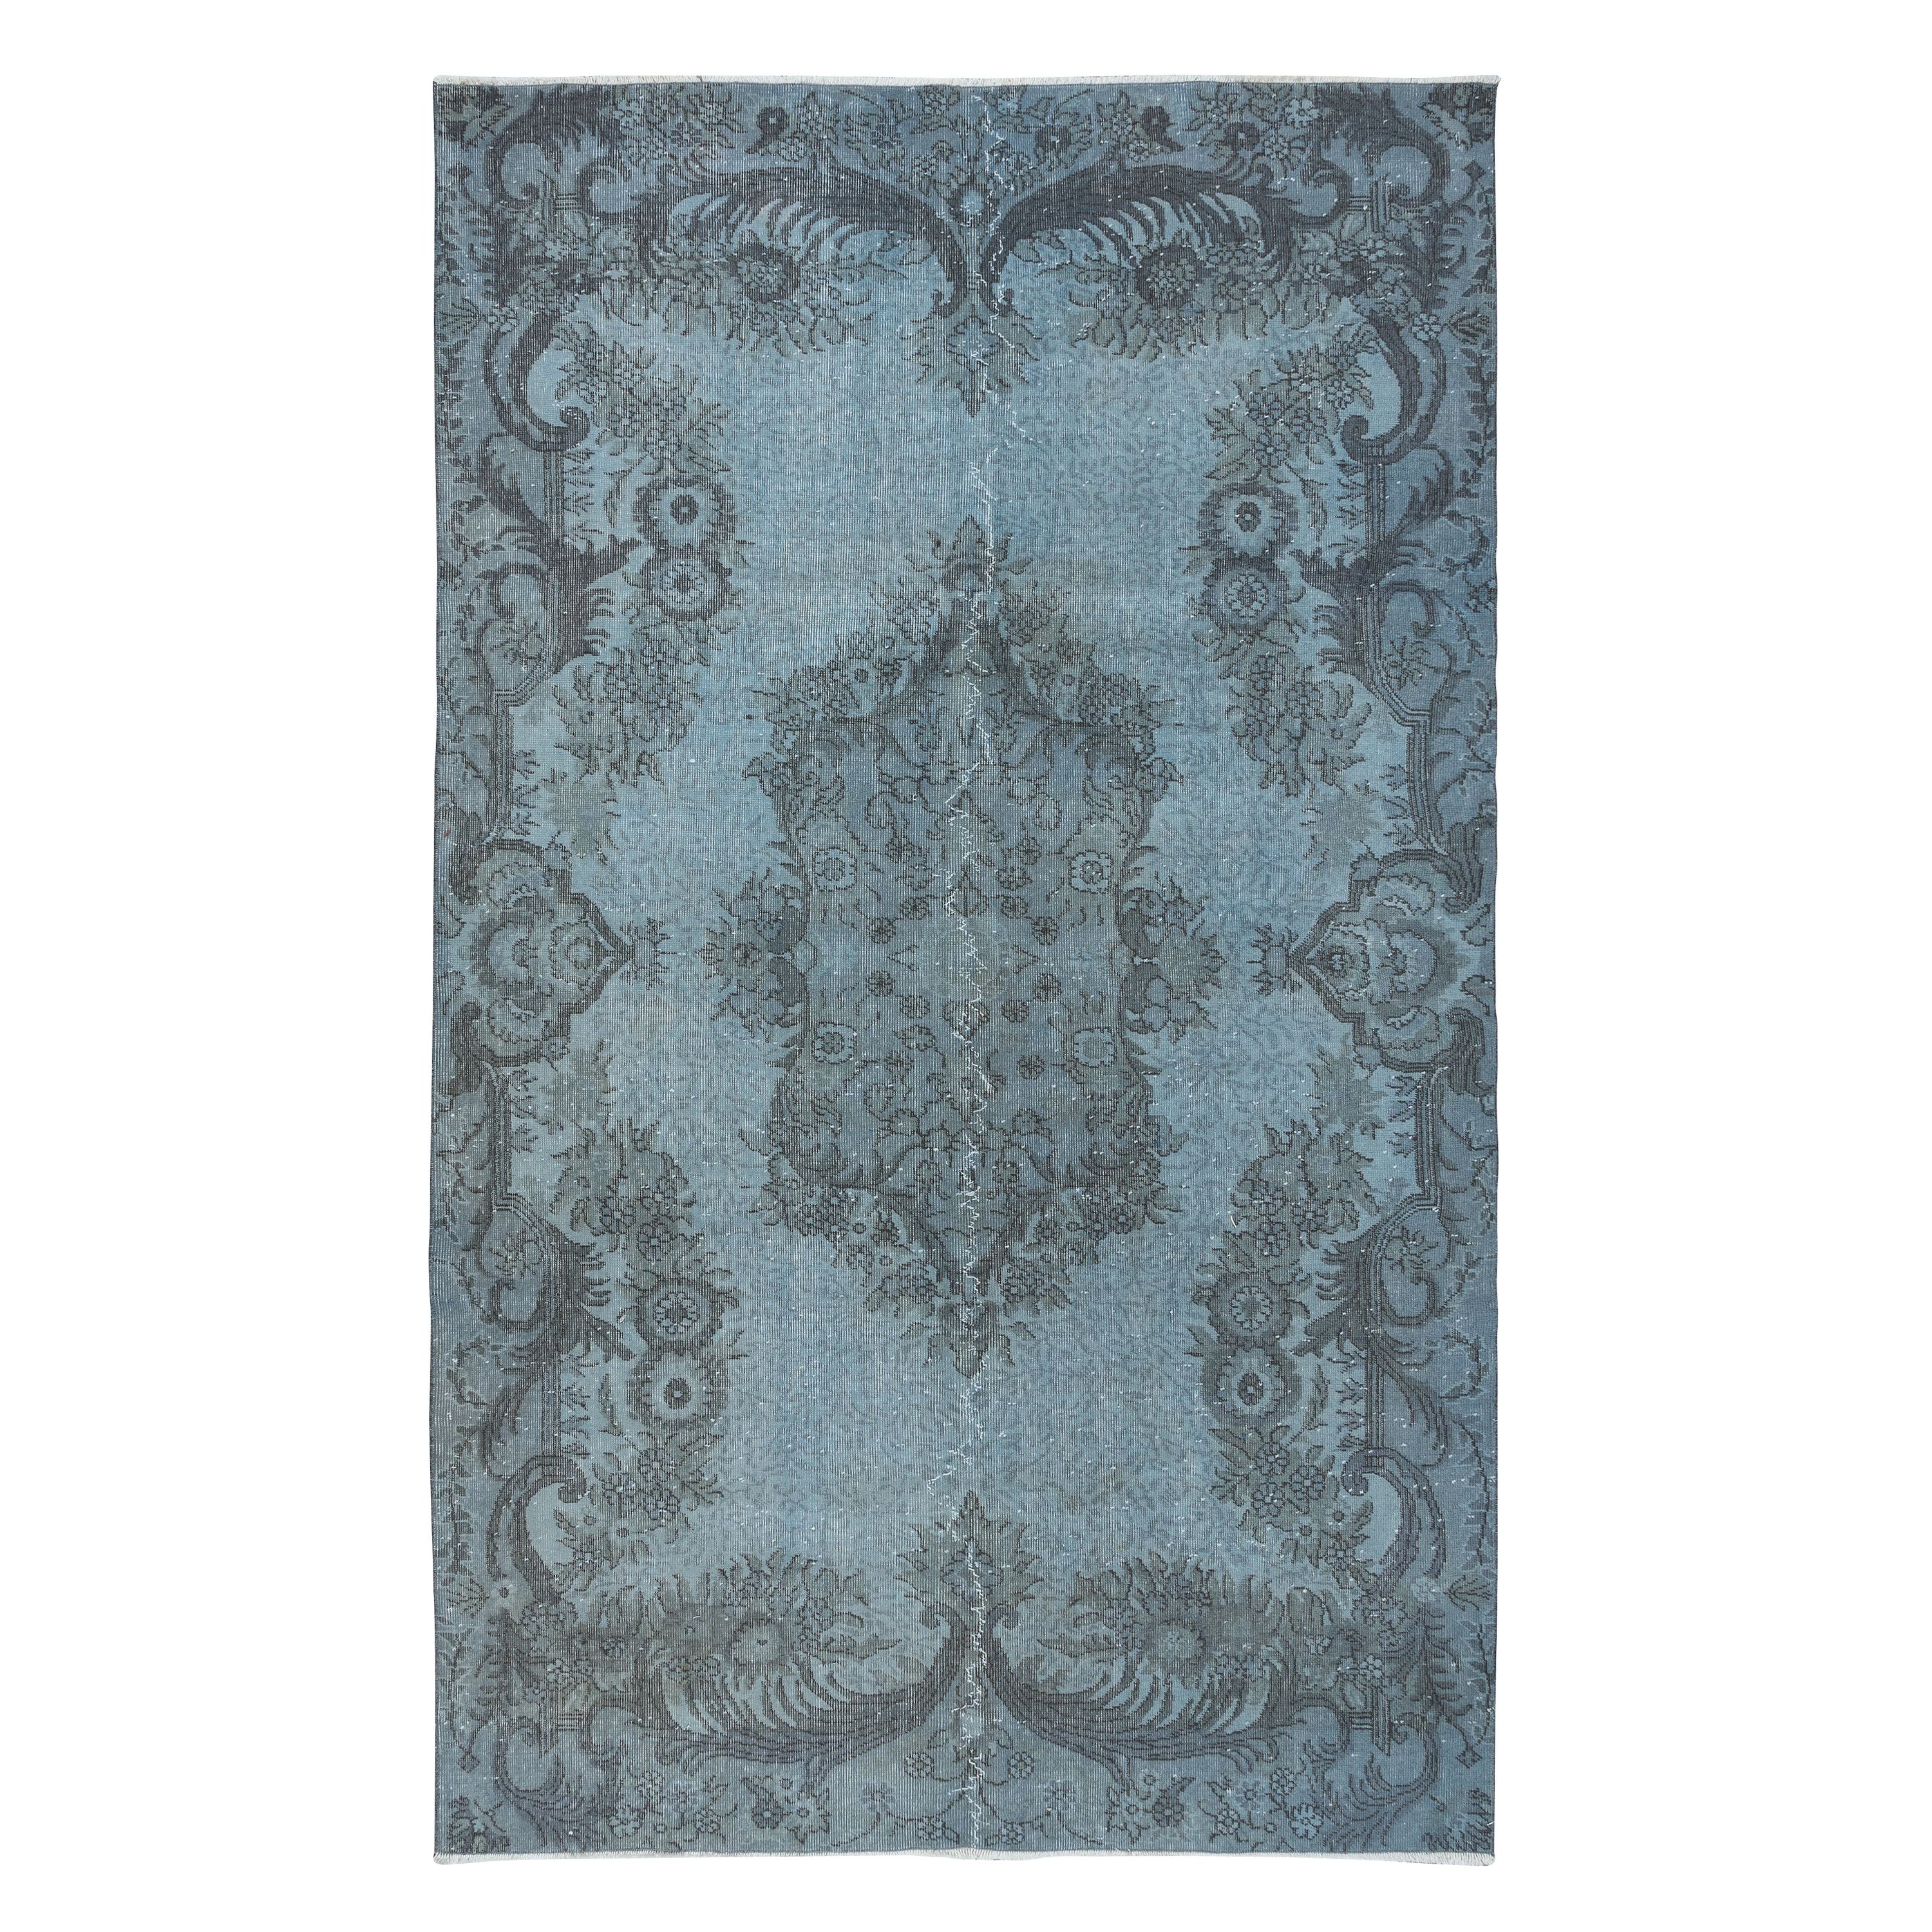 6.2x10 Ft Modern Handmade Wool Area Rug in Light Blue, Turkish Low Pile Carpet For Sale